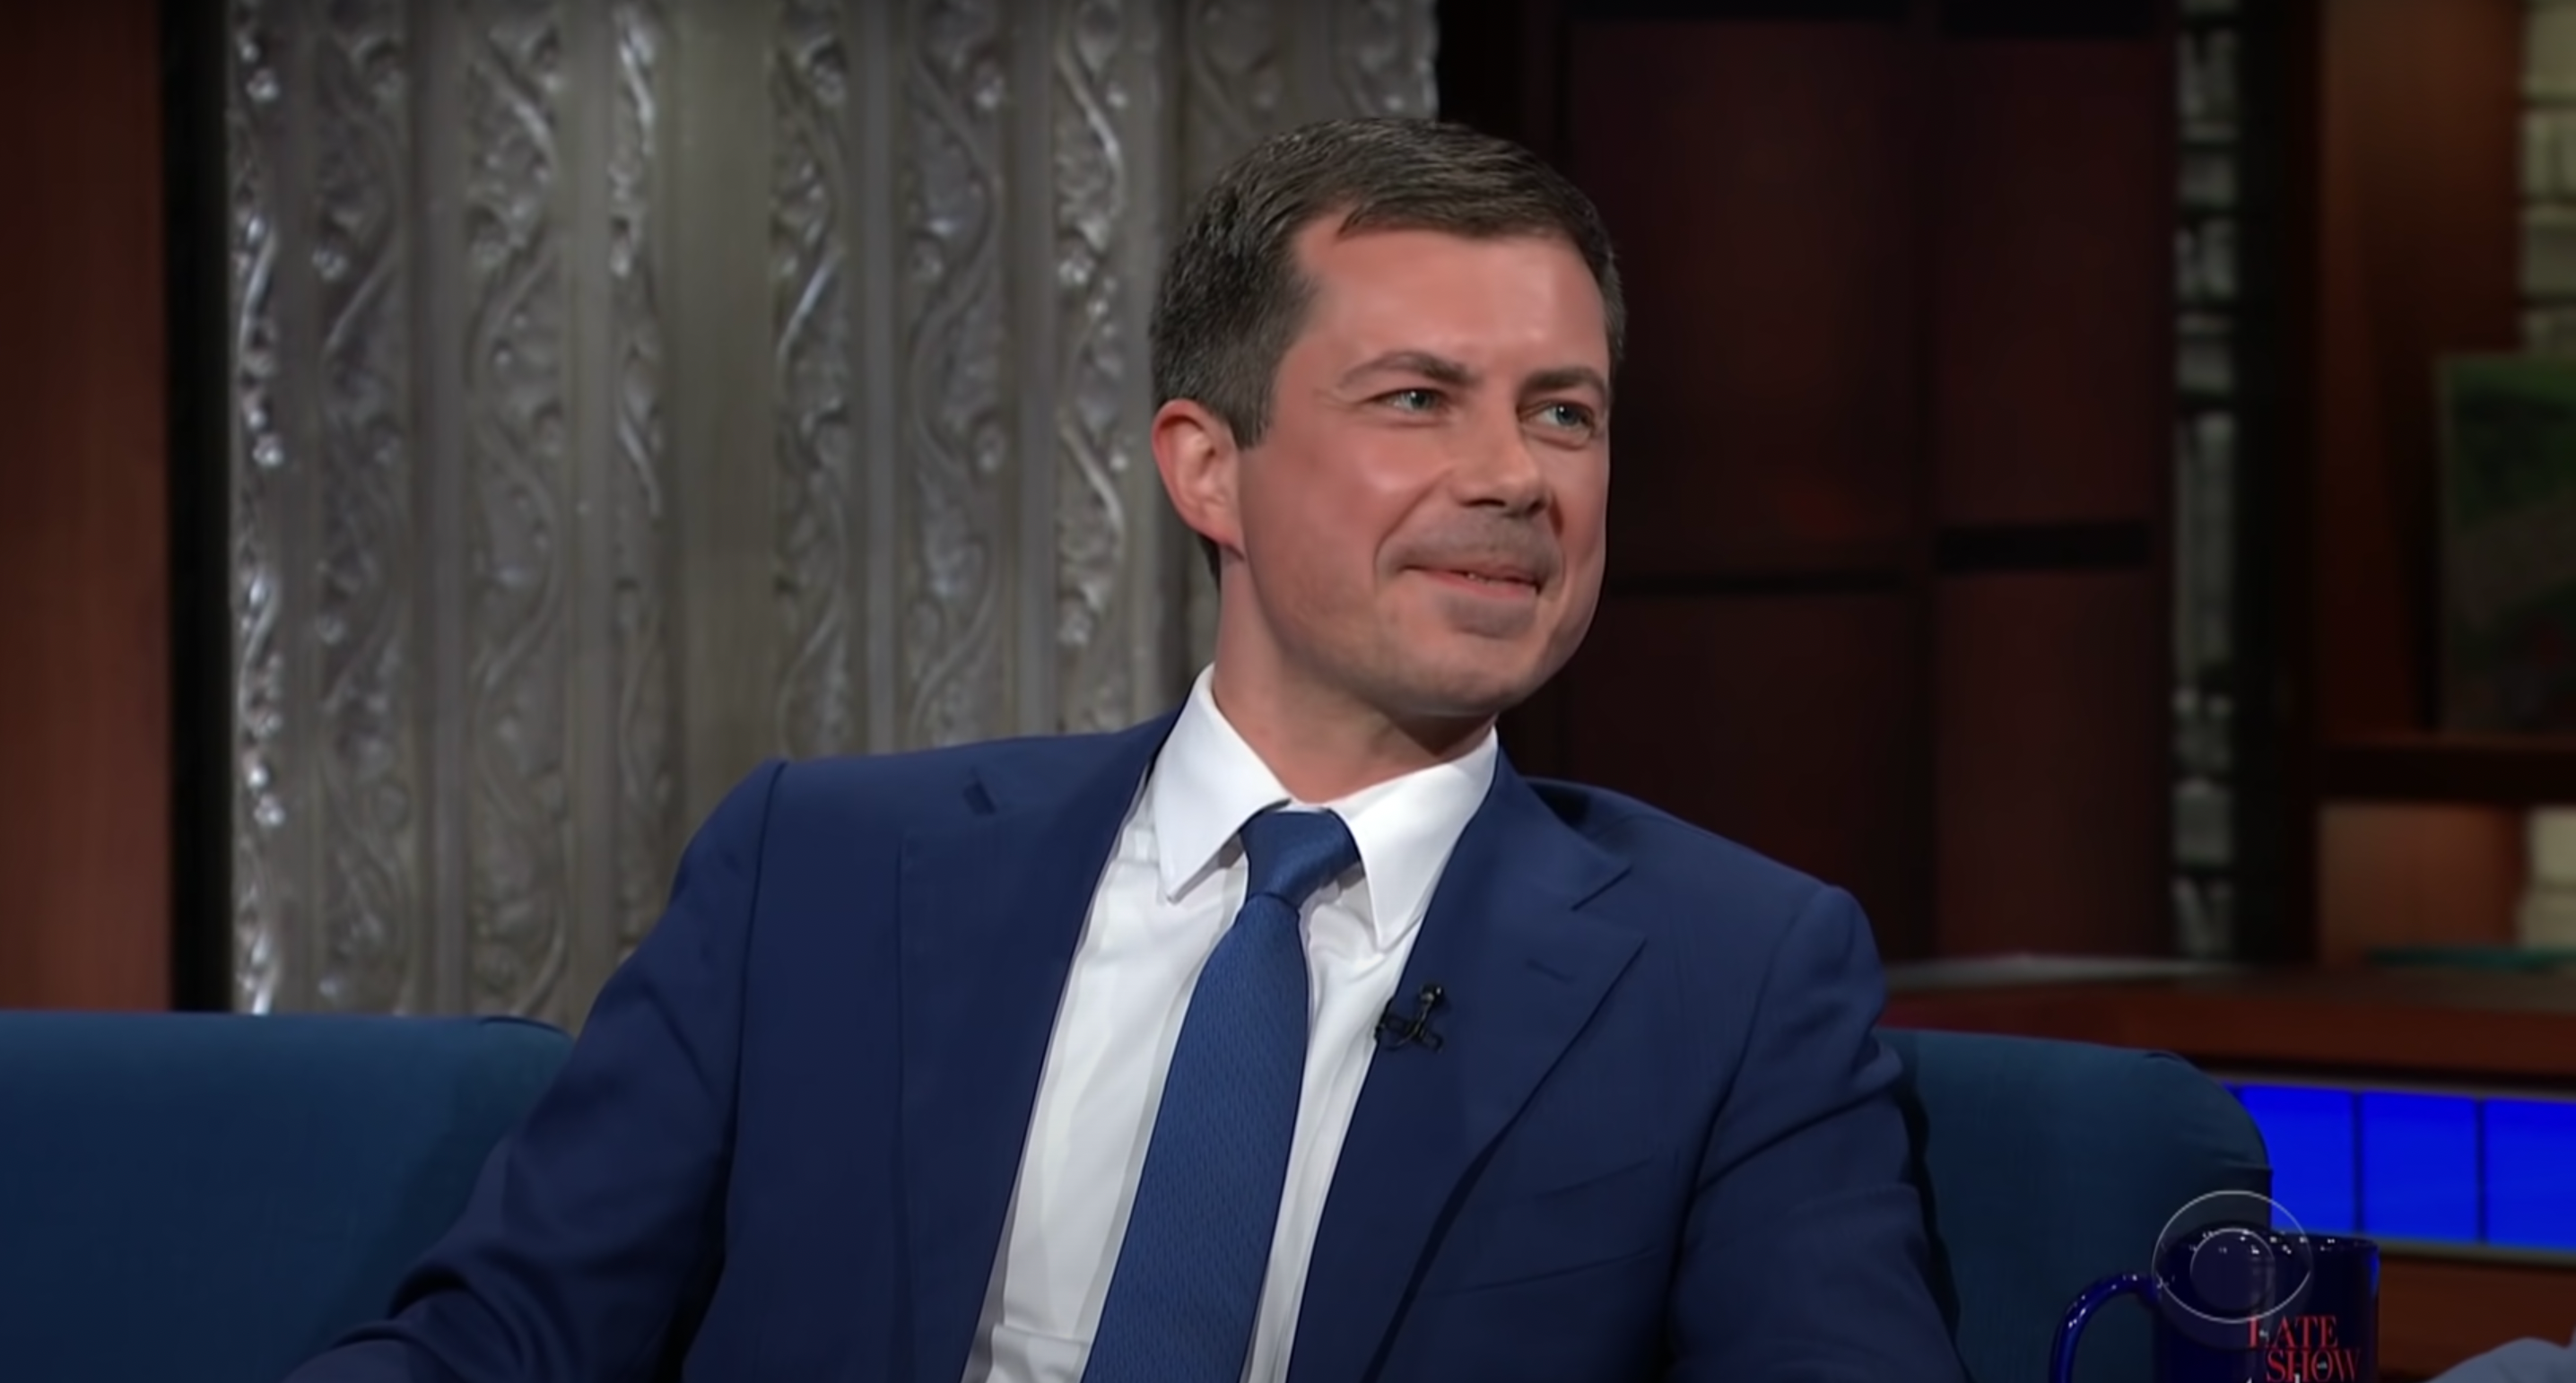 Pete Buttigieg spoke about his fear for transgender kids under some state’s governments.